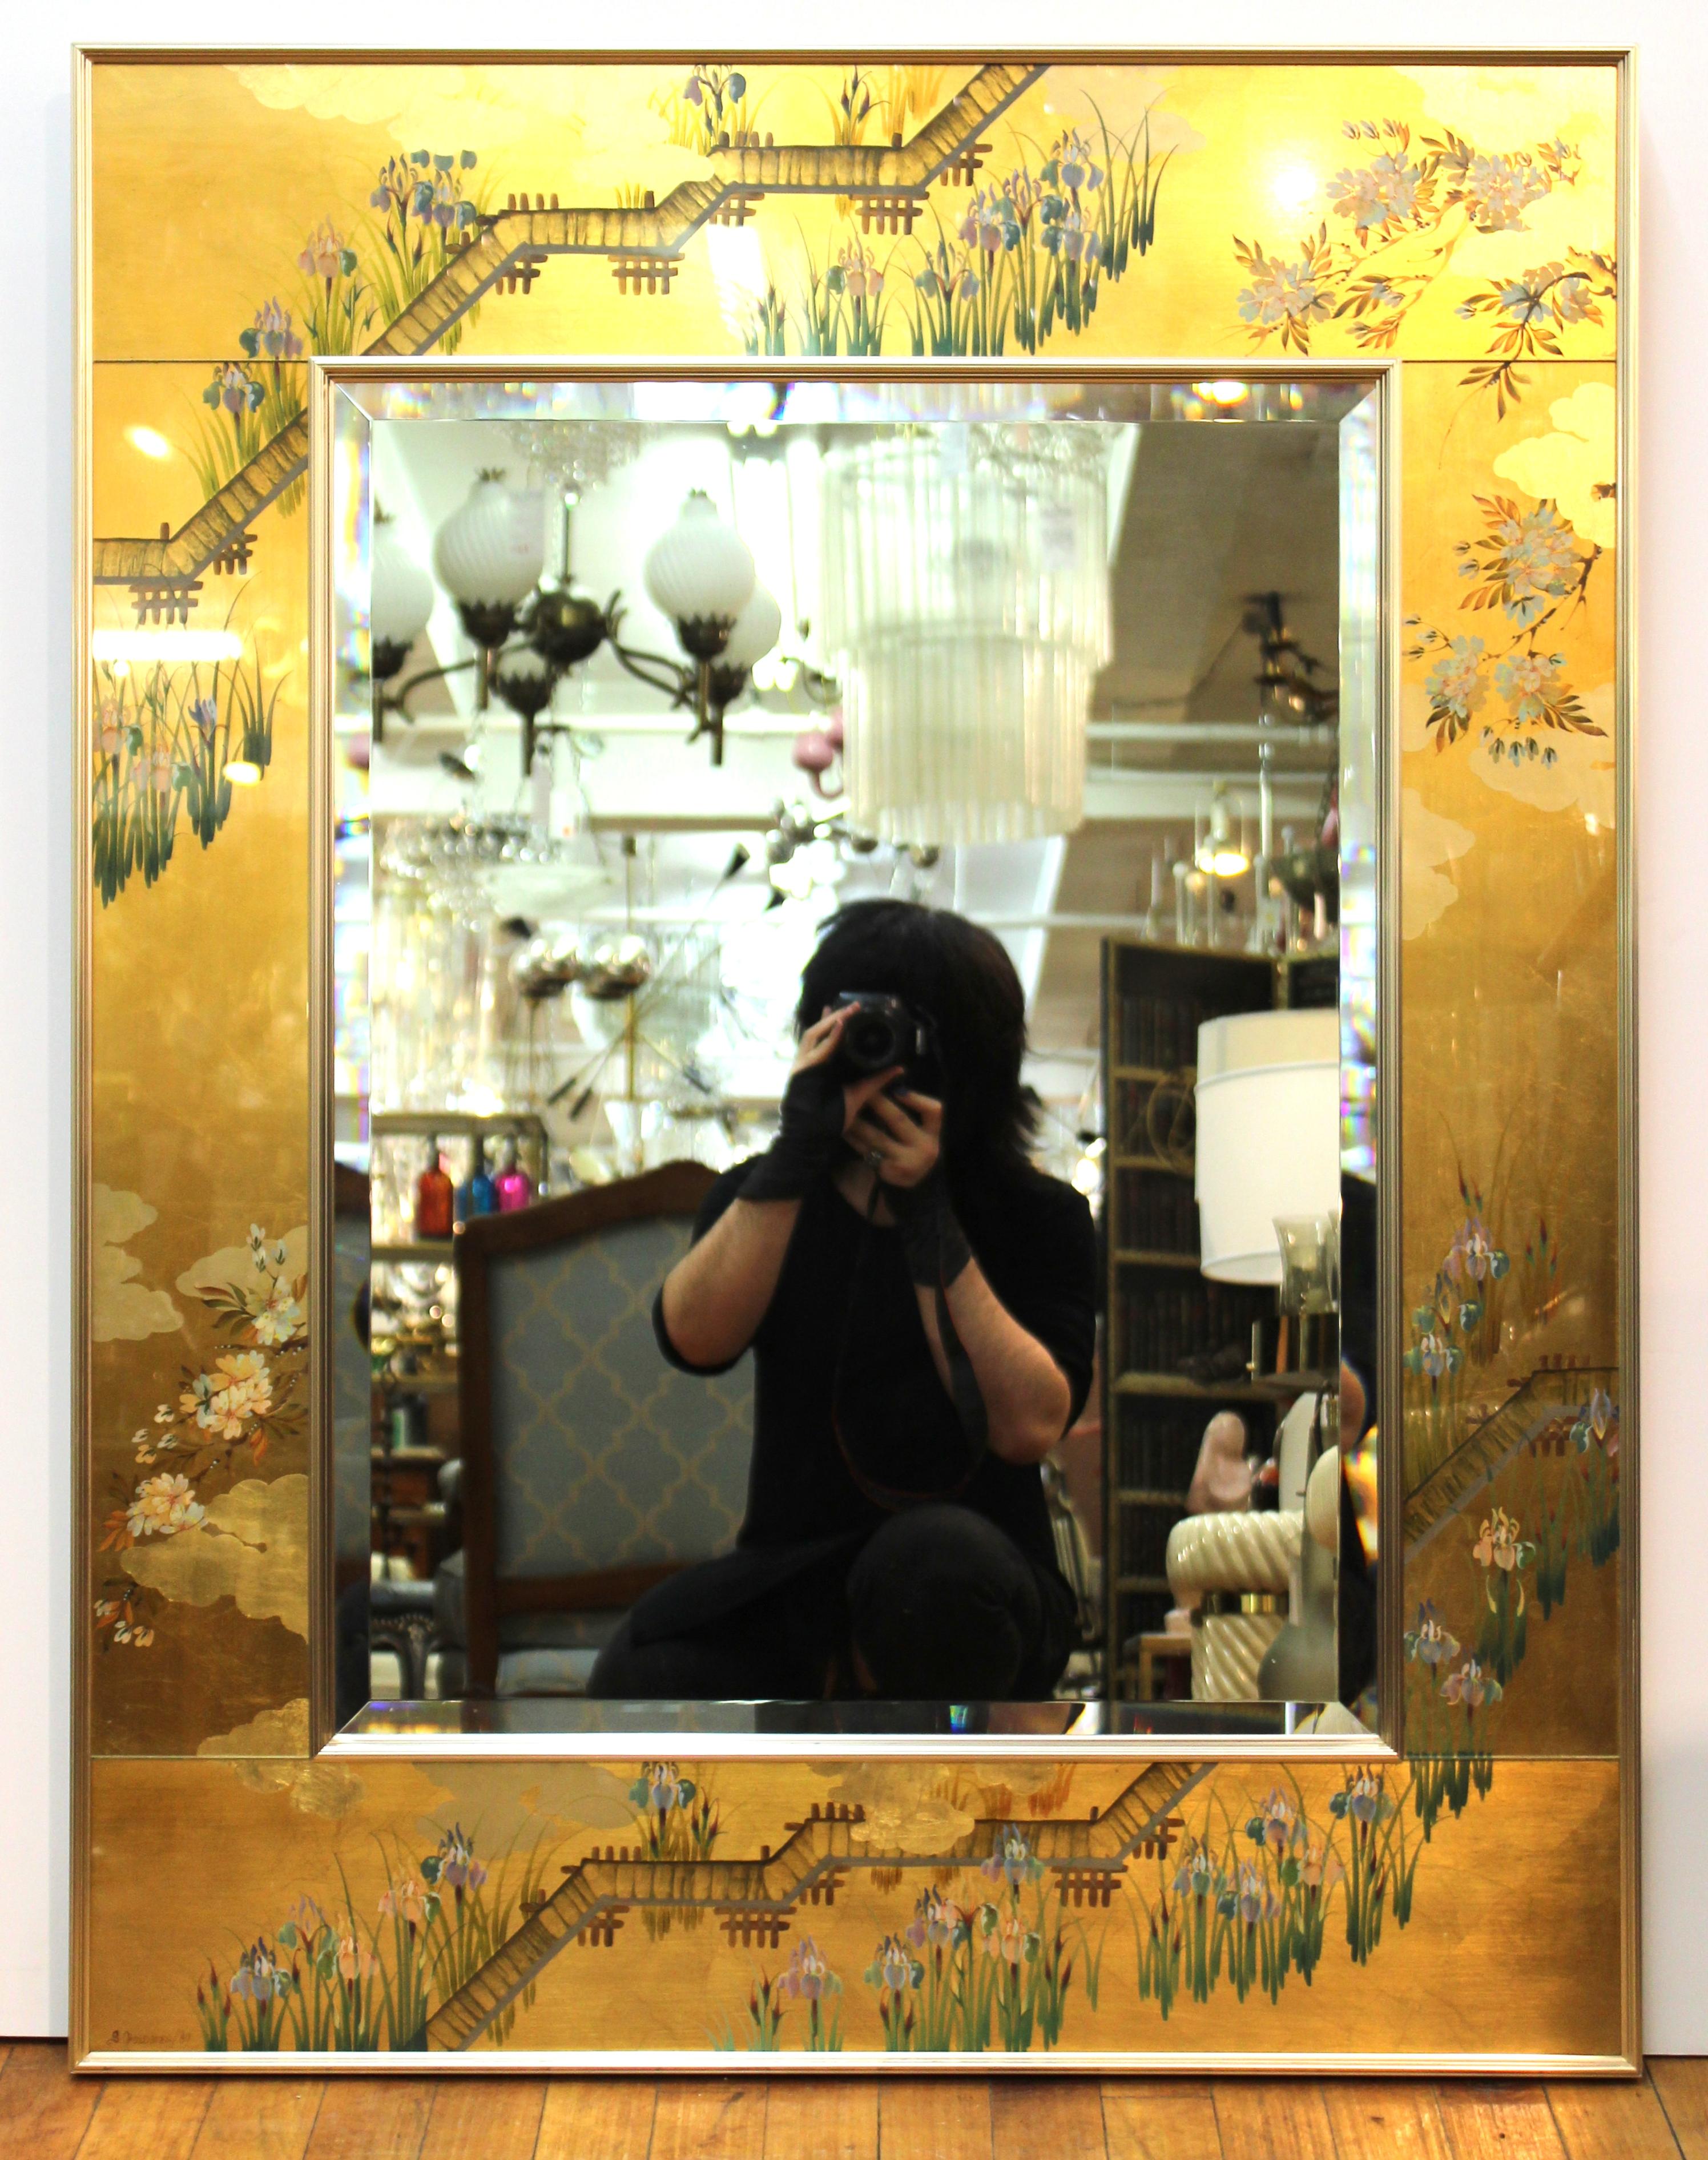 LaBarge Hollywood Regency hand painted eglomise wall mirror with chinoiserie theme, signed 'S. Goldstein 89' in lower left corner. In great vintage condition with age-appropriate wear and use.